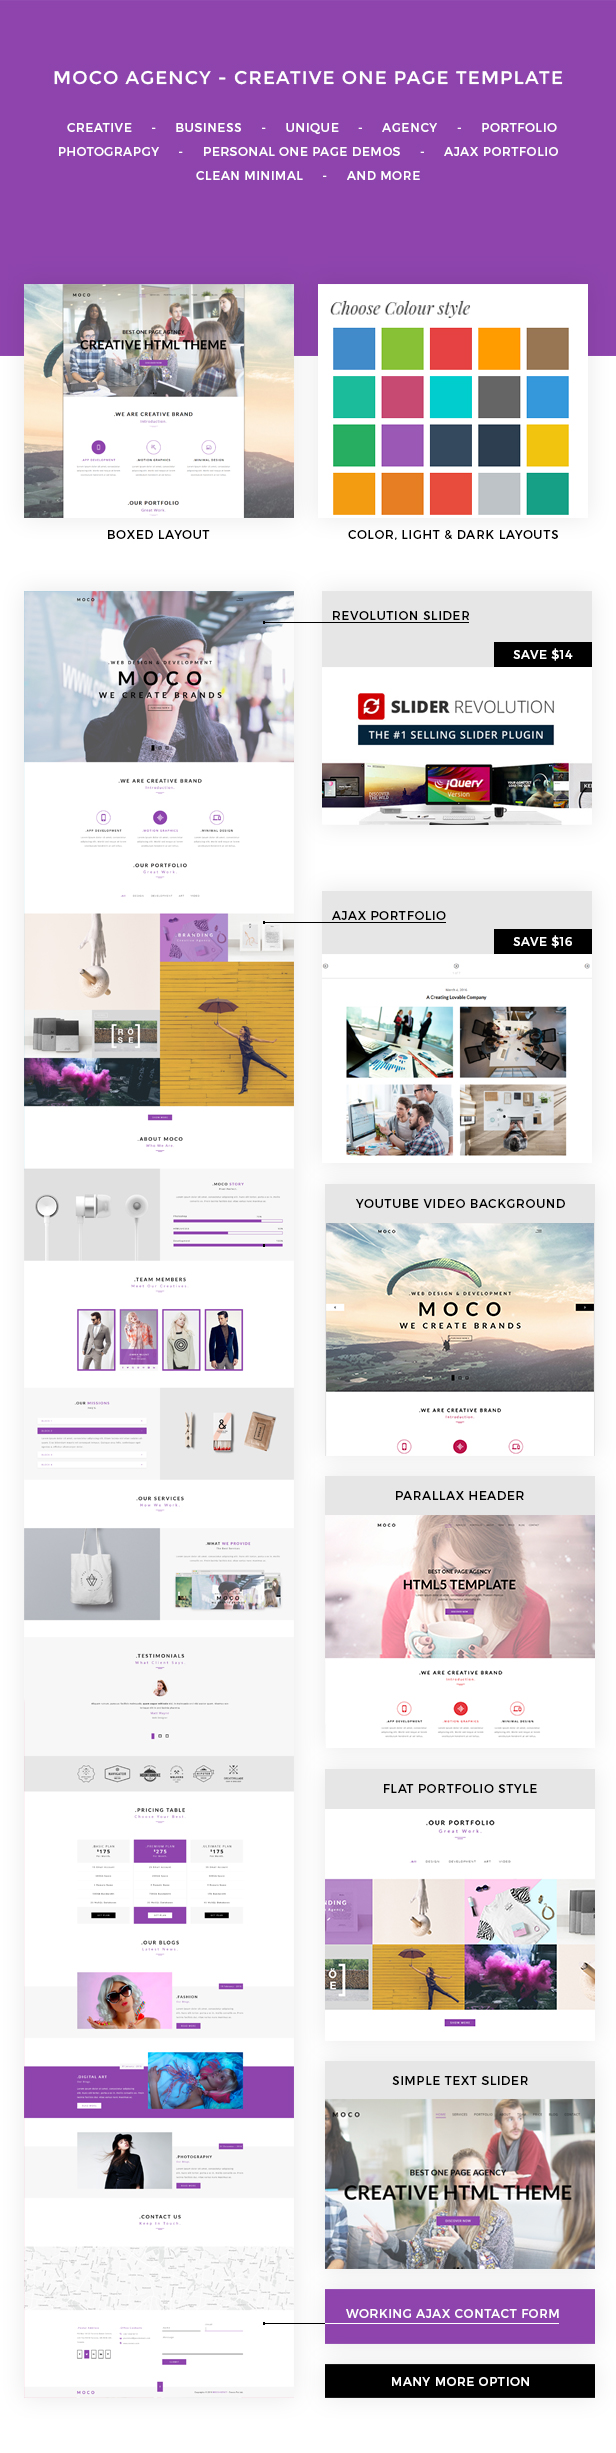 Moco - Creative One Page HTML5 Template - 1